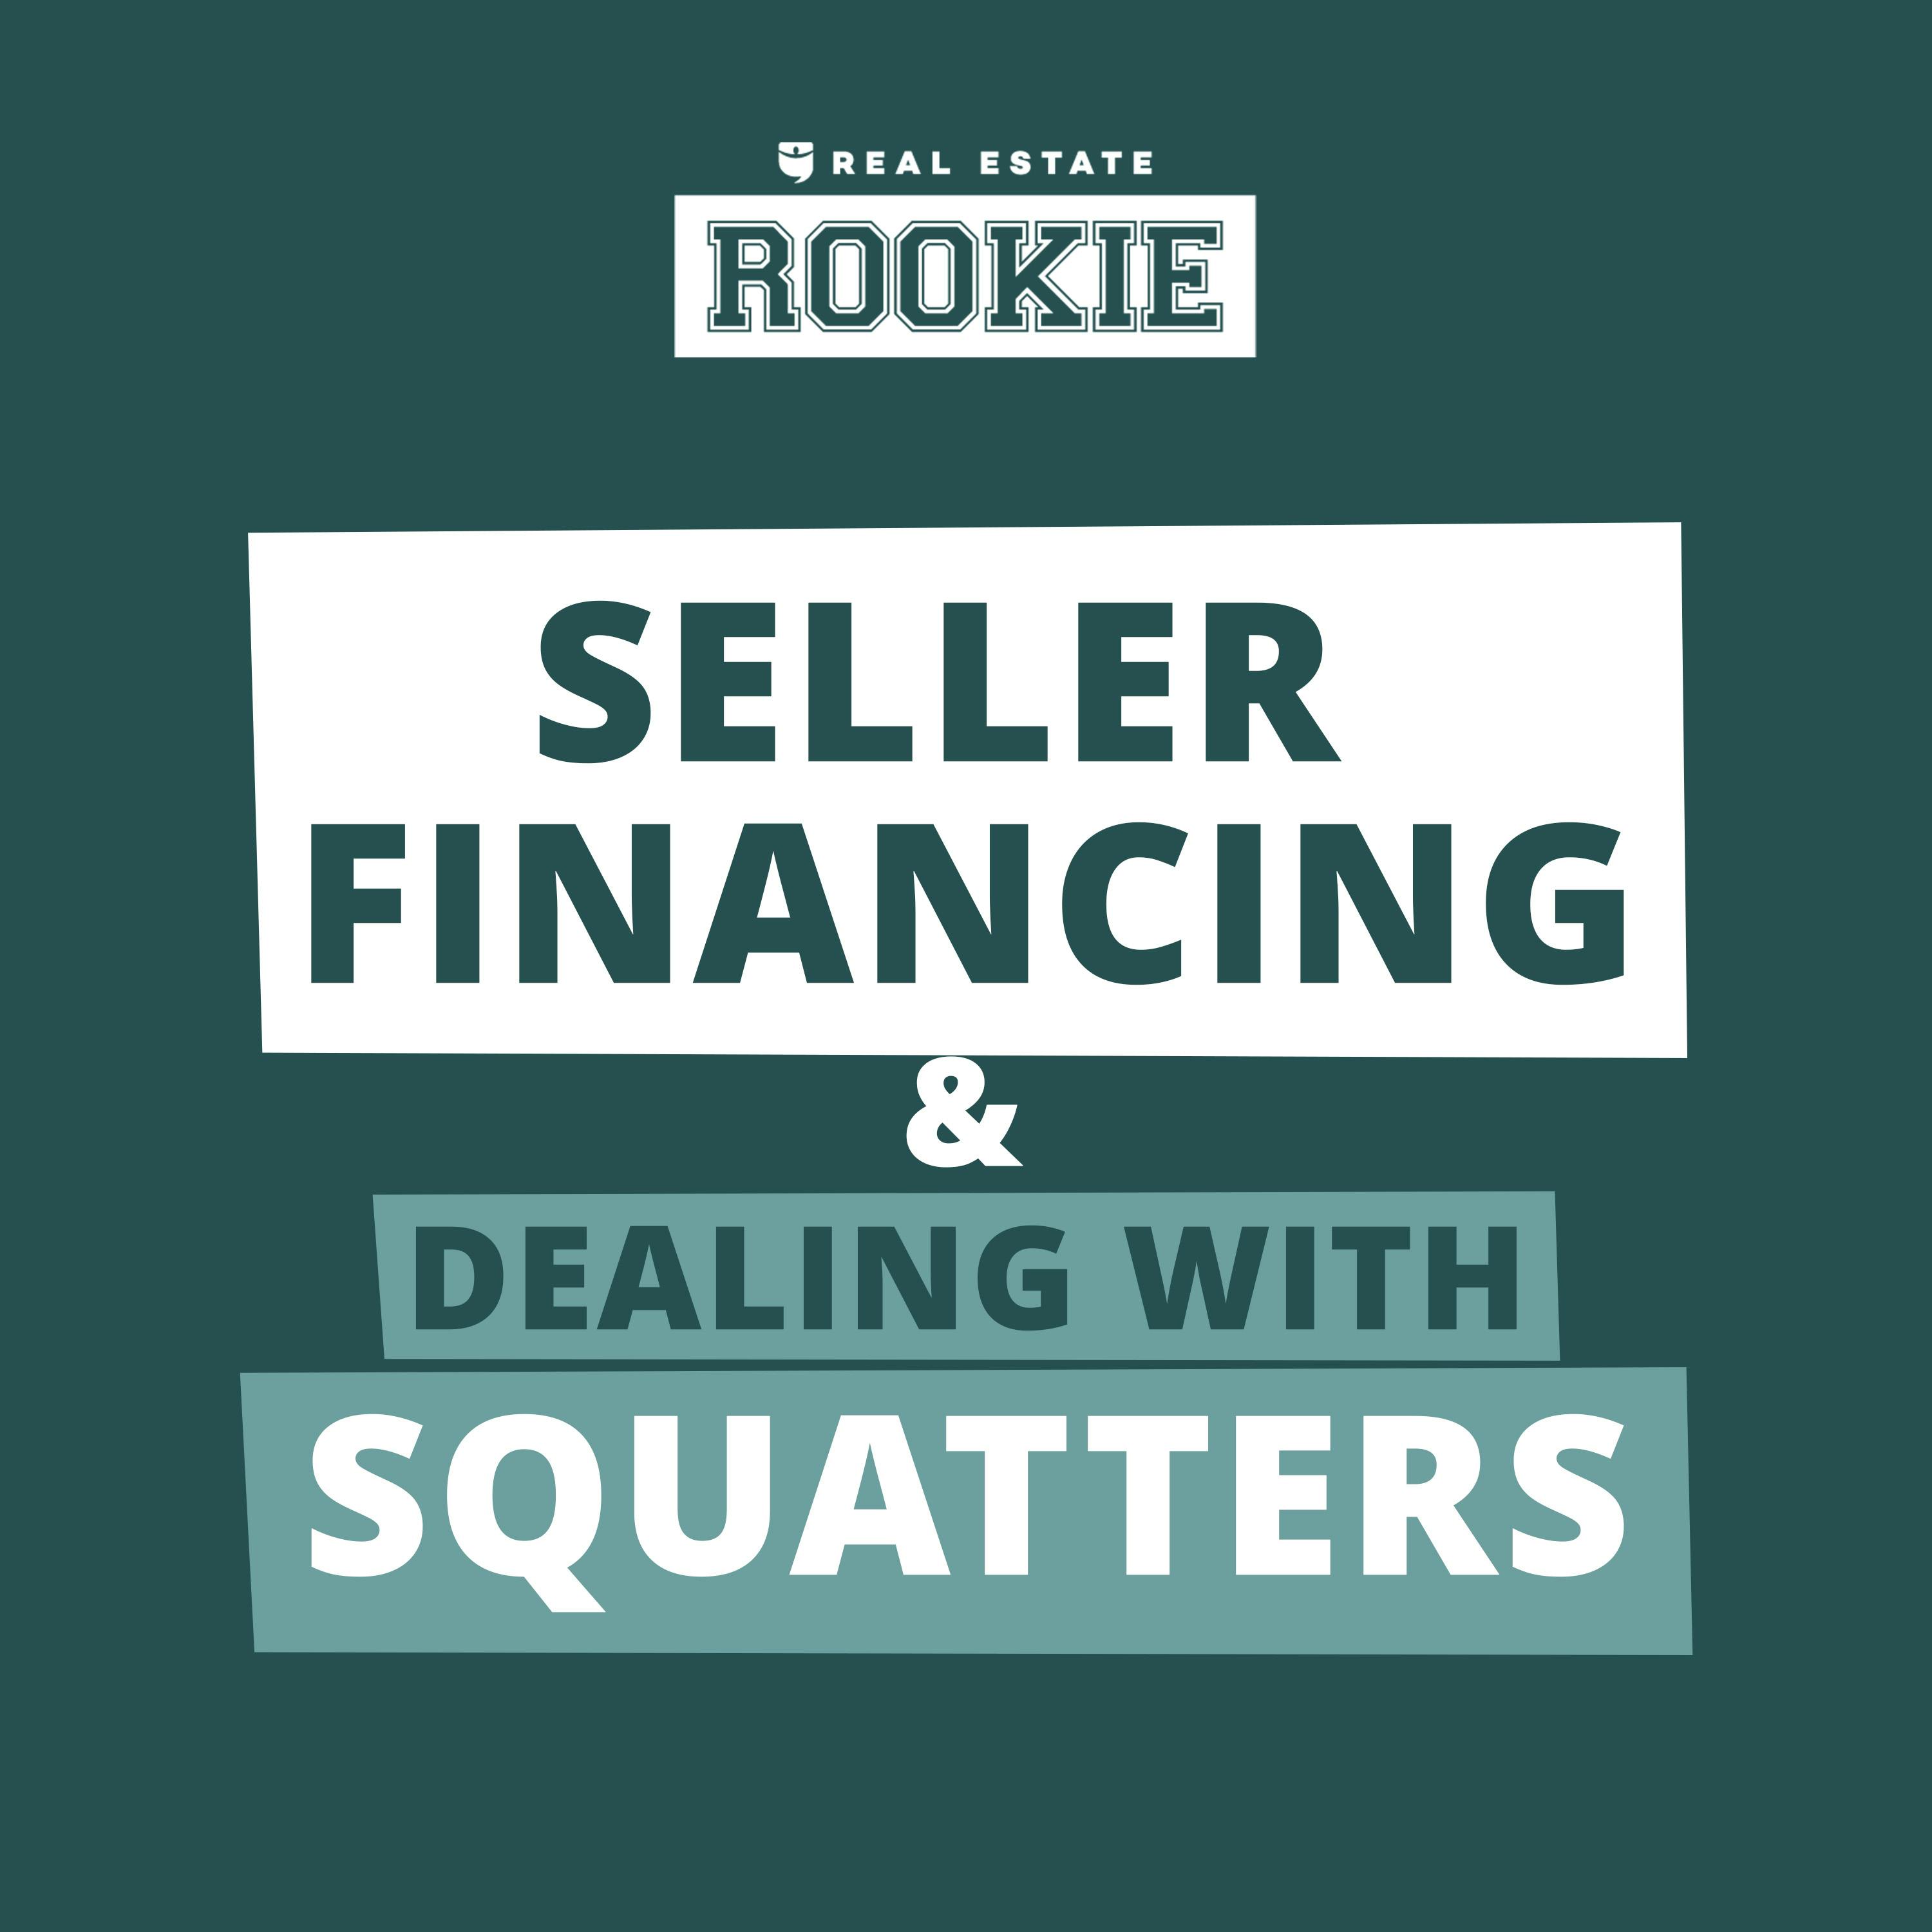 268: Rookie Reply: Seller Financing, Squatters, and Is Becoming an Agent Worth It?